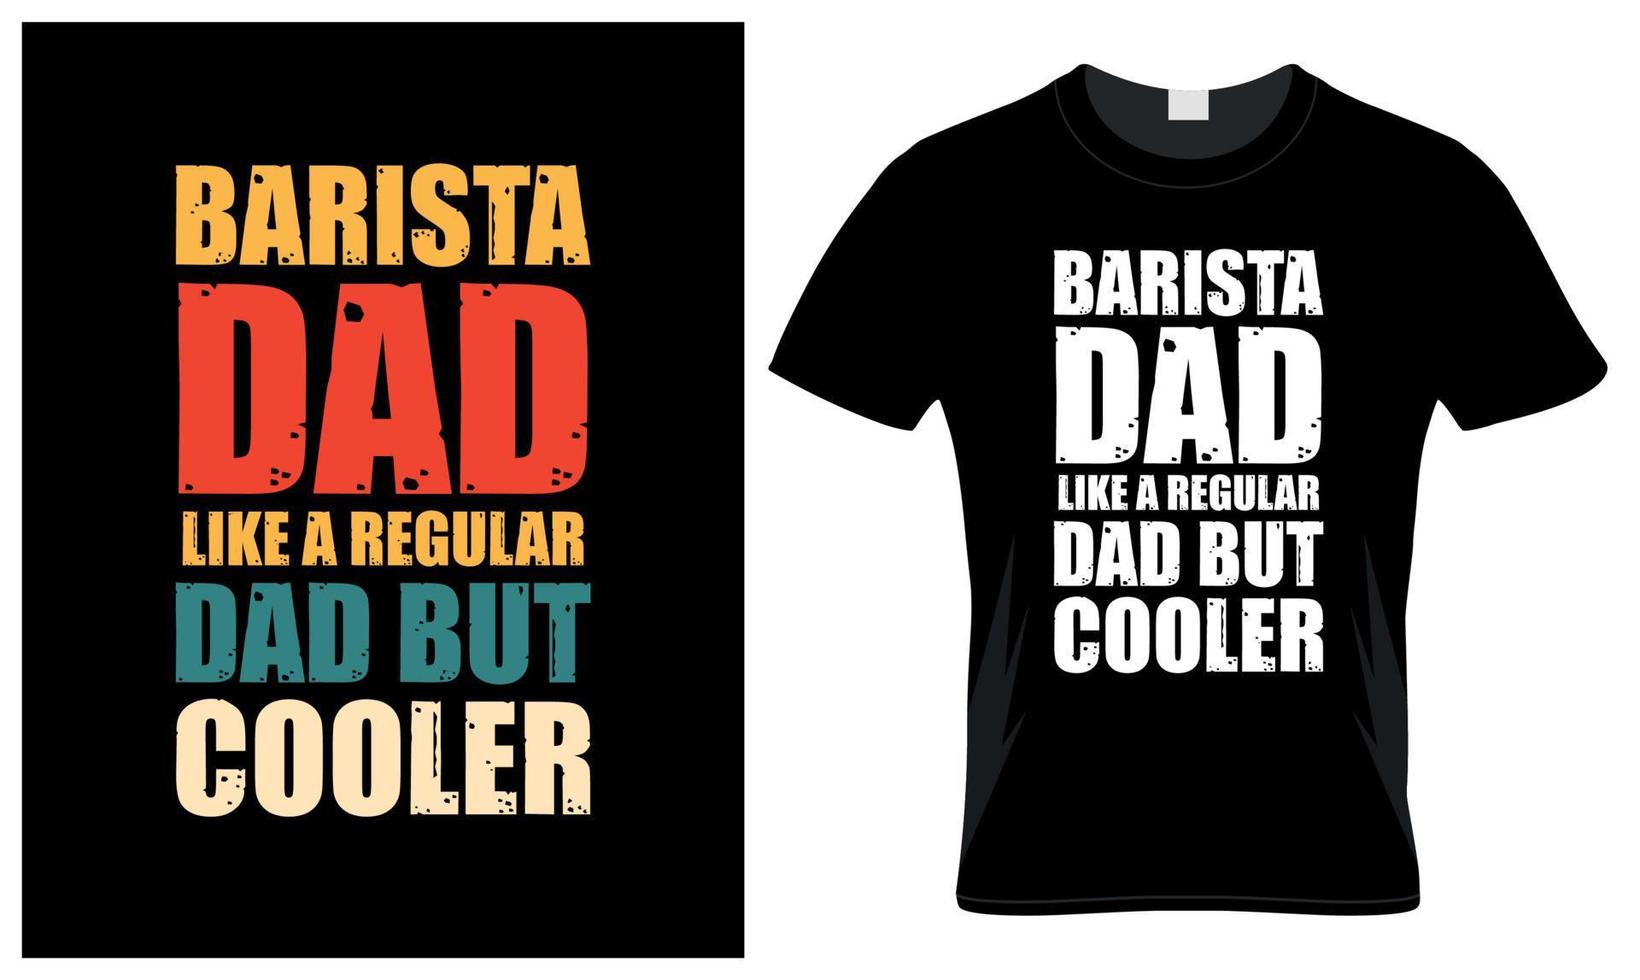 Barista dad lover father's day vintage t-shirt design vector